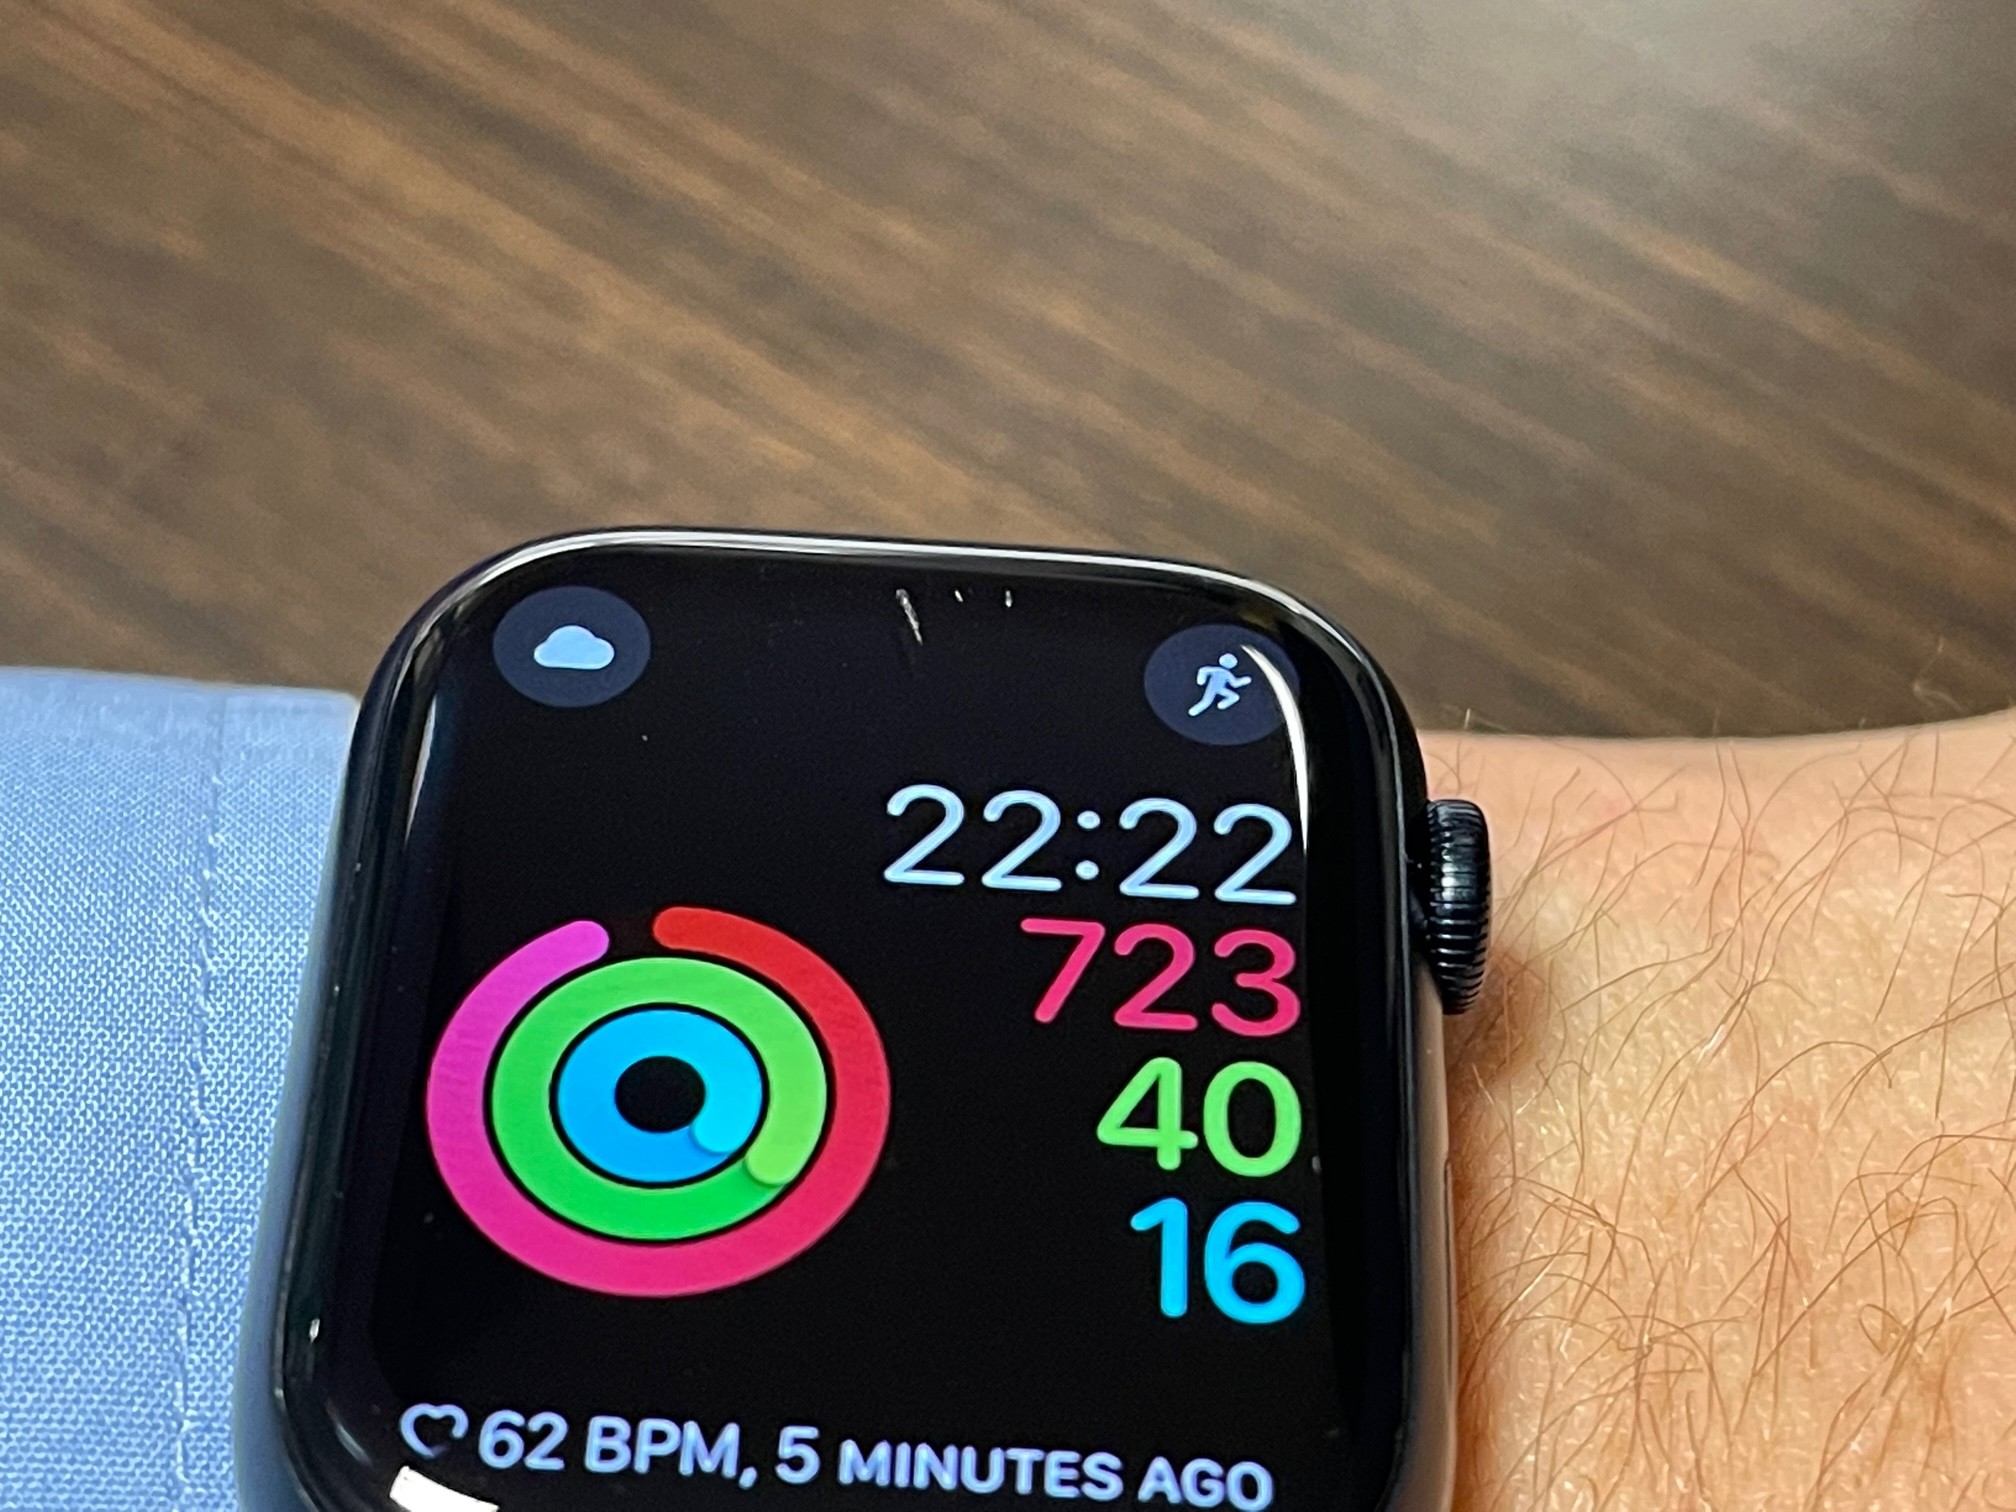 Any way to fix this little scratch in the screen? : r/AppleWatch